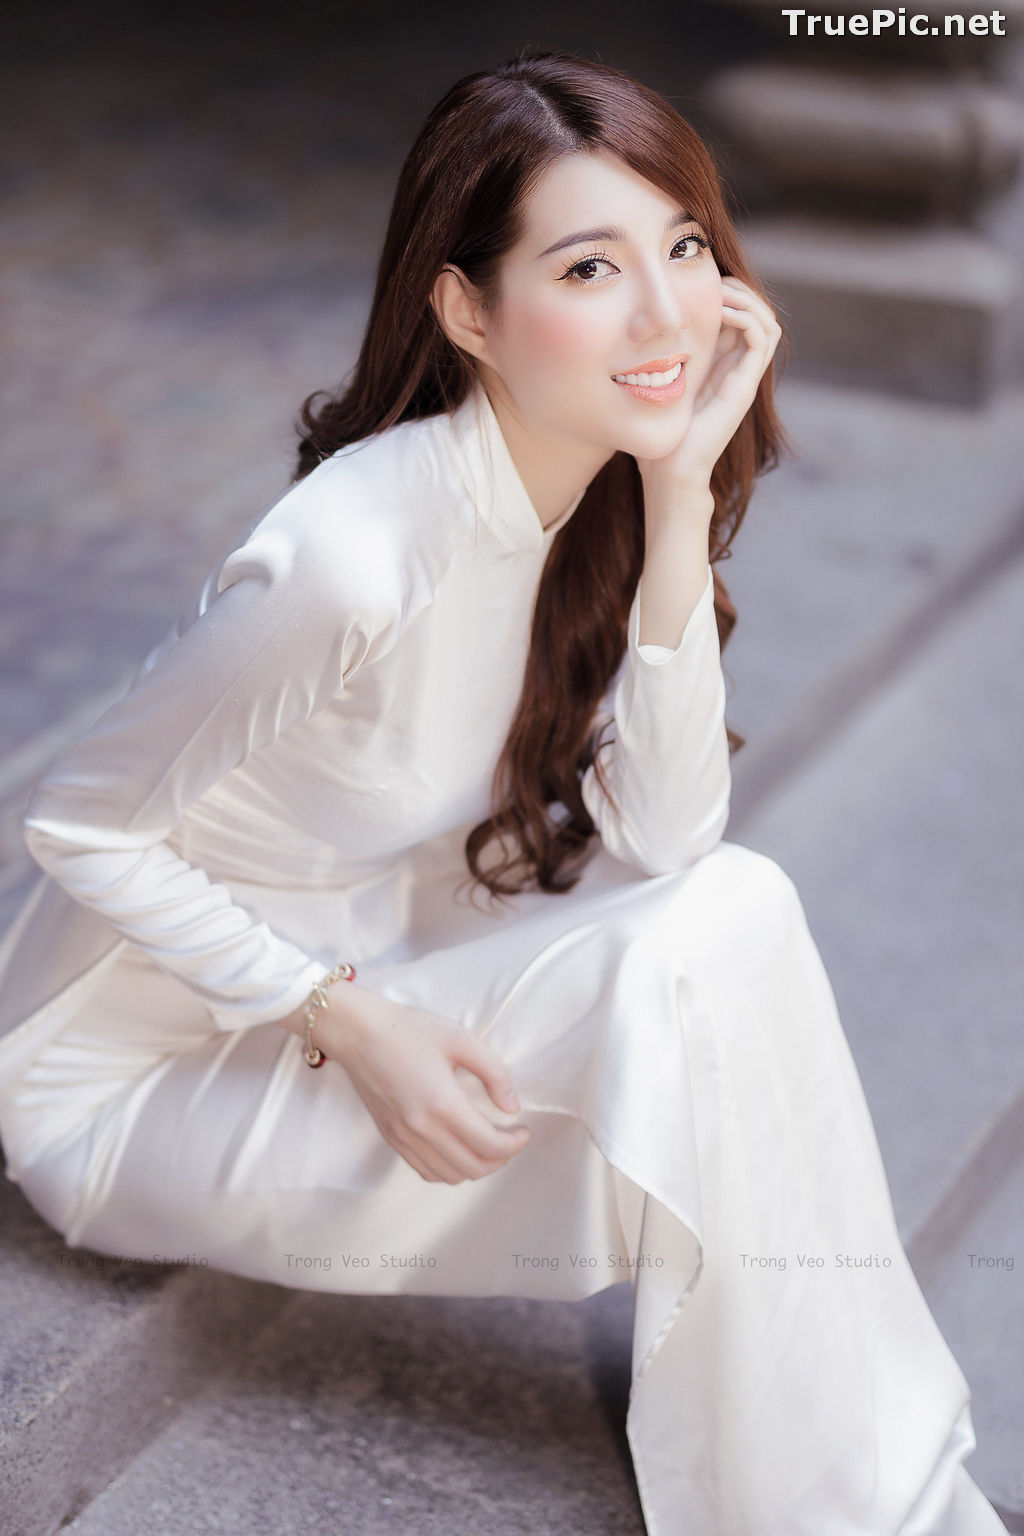 Image The Beauty of Vietnamese Girls with Traditional Dress (Ao Dai) #3 - TruePic.net - Picture-73